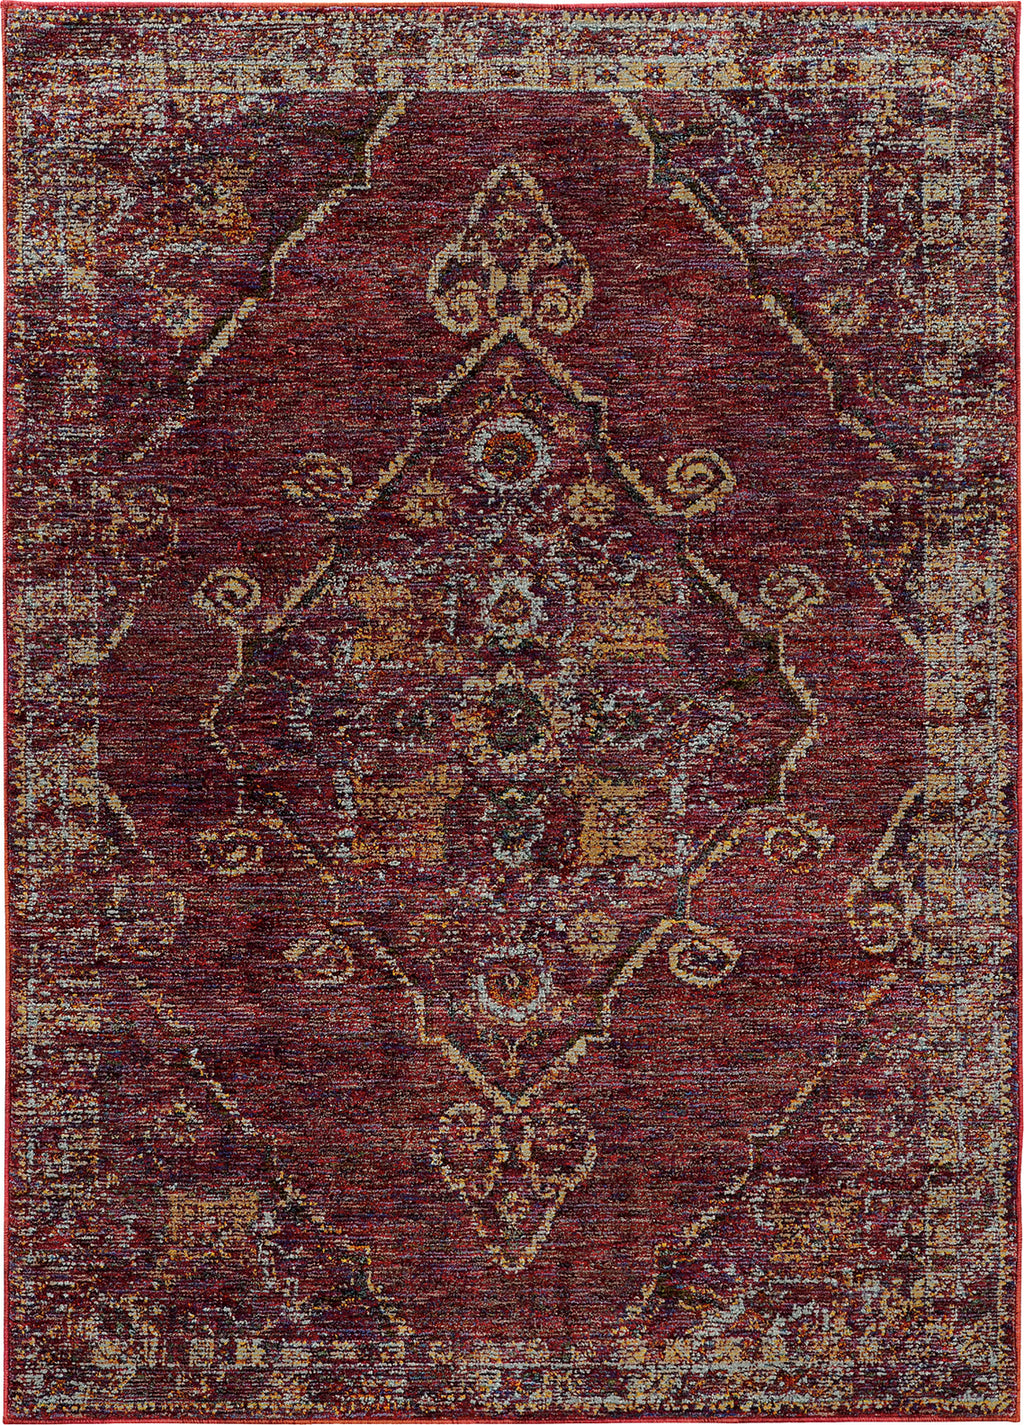 Oriental Weavers Andorra 7135E Red/ Gold Area Rug main image Featured